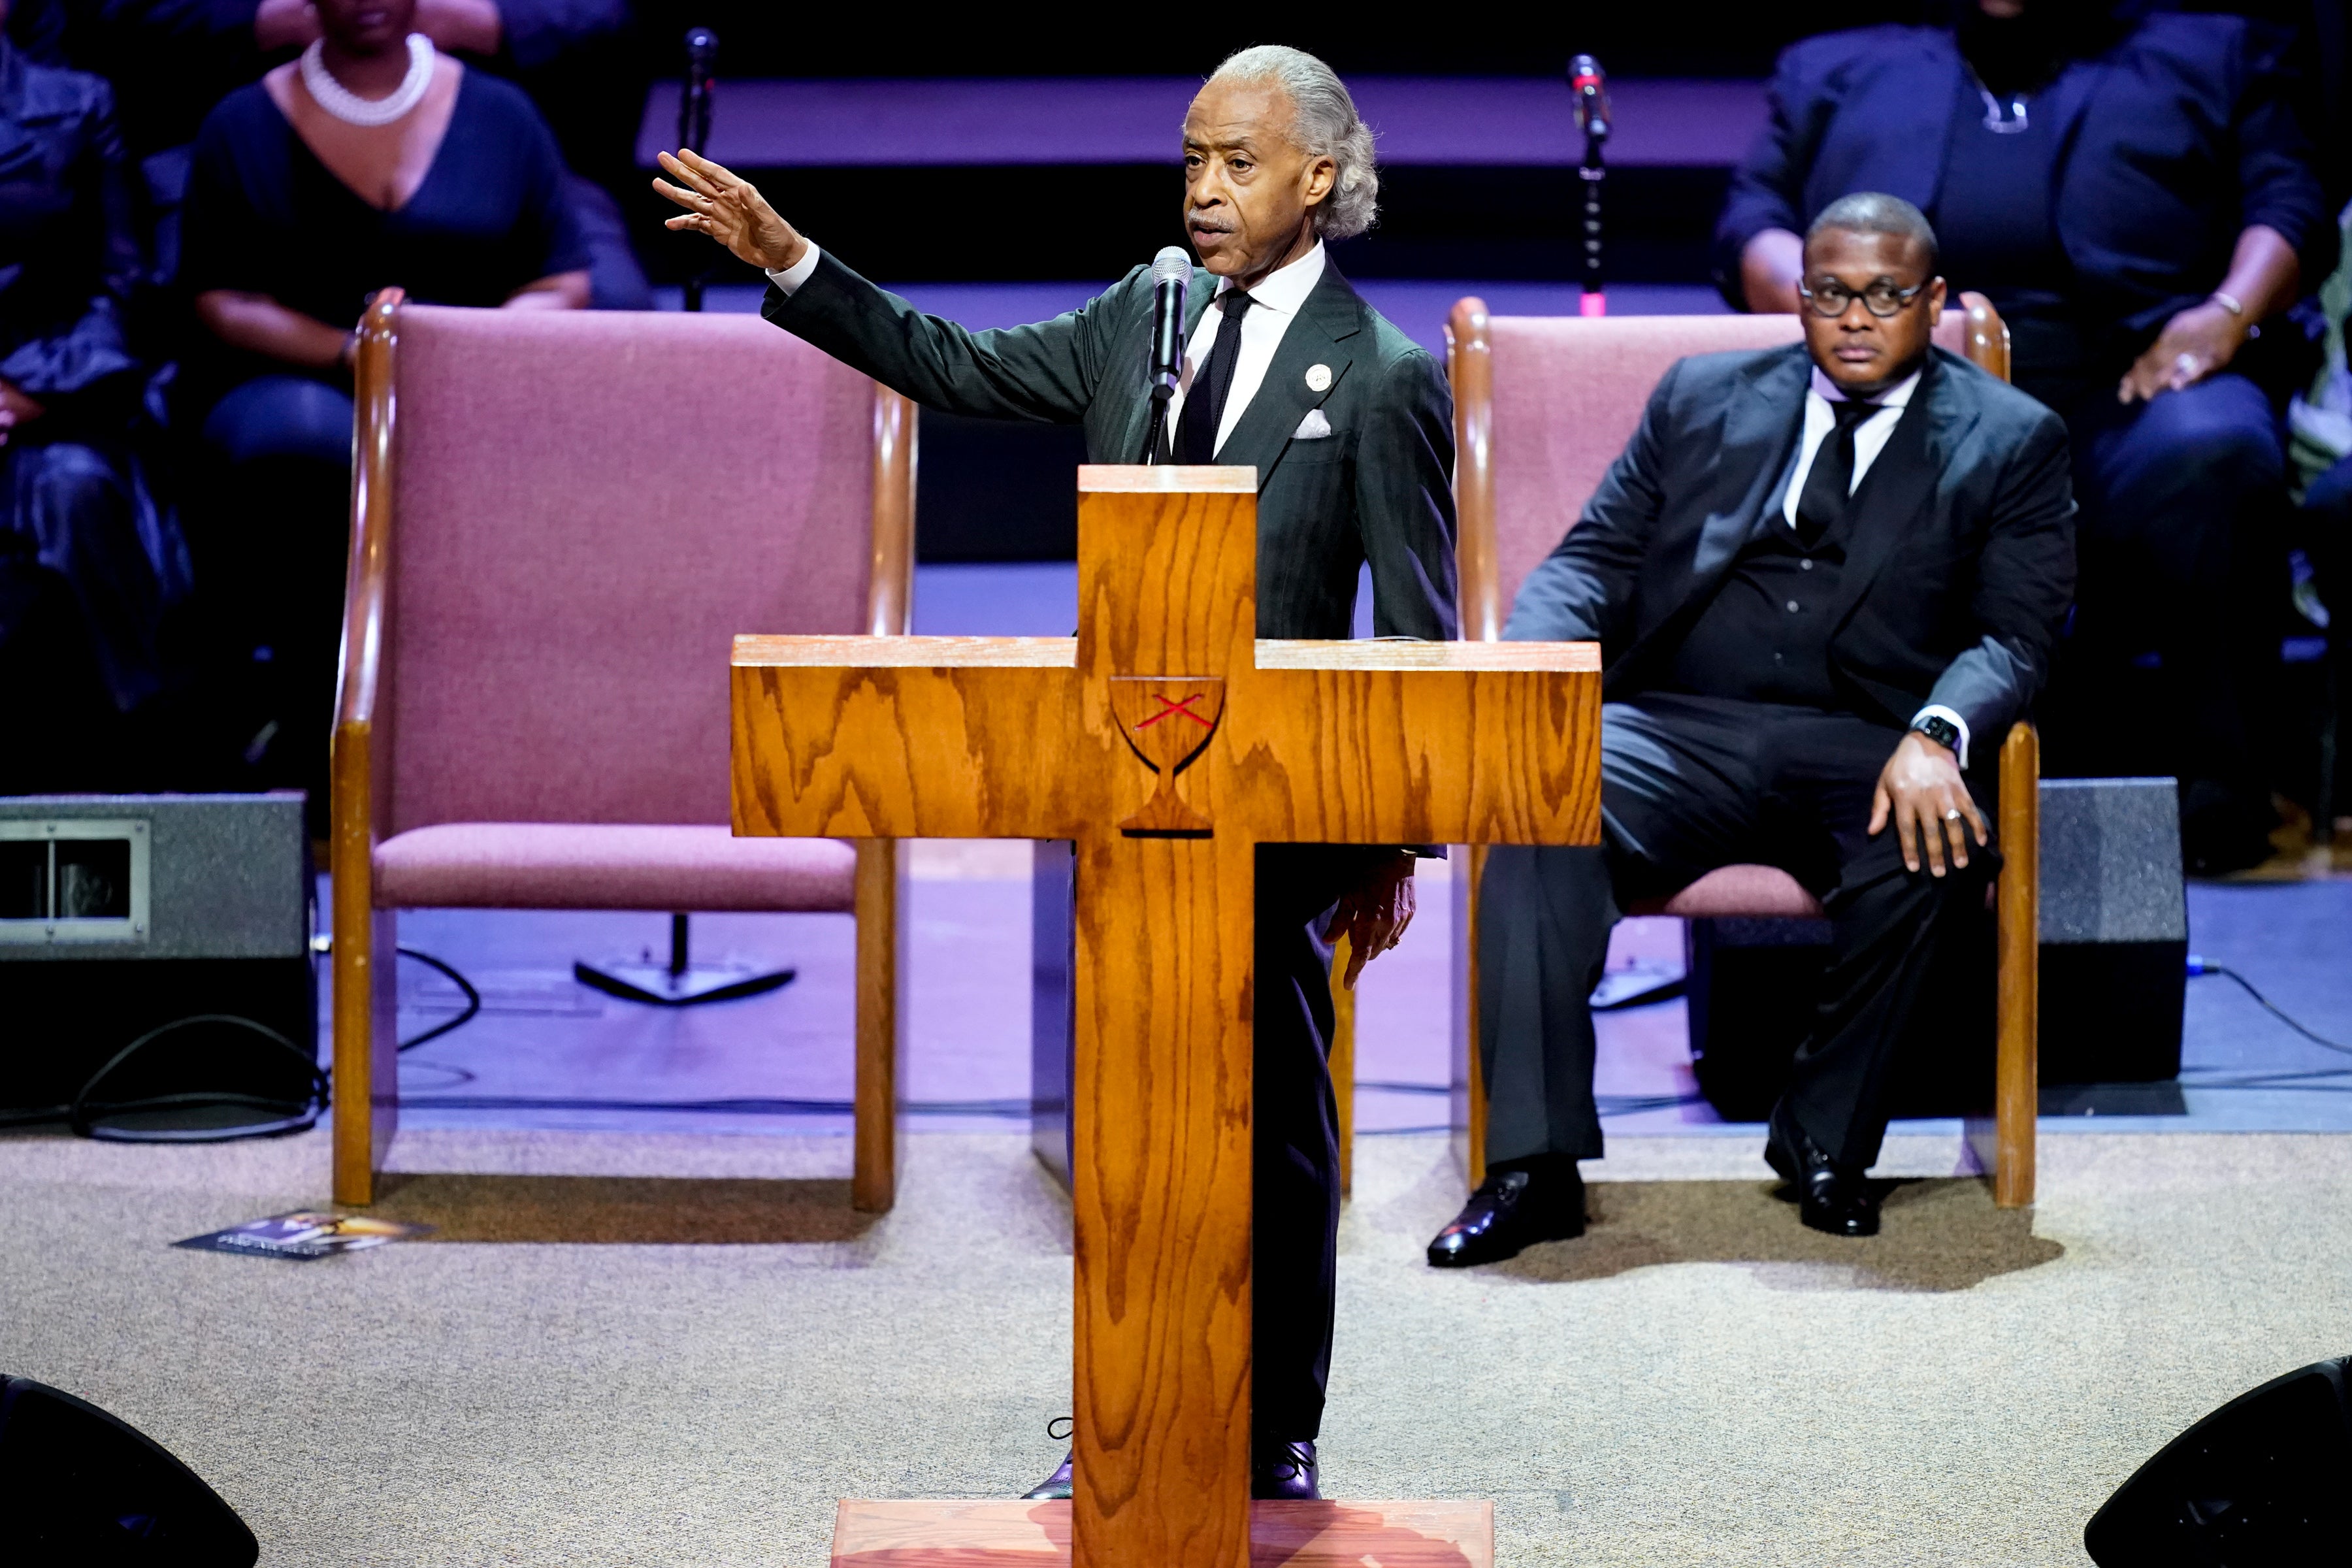 Rev Al Sharpton delivers a eulogy at a funeral service for Tyre Nichols in Memphis on Wednesday